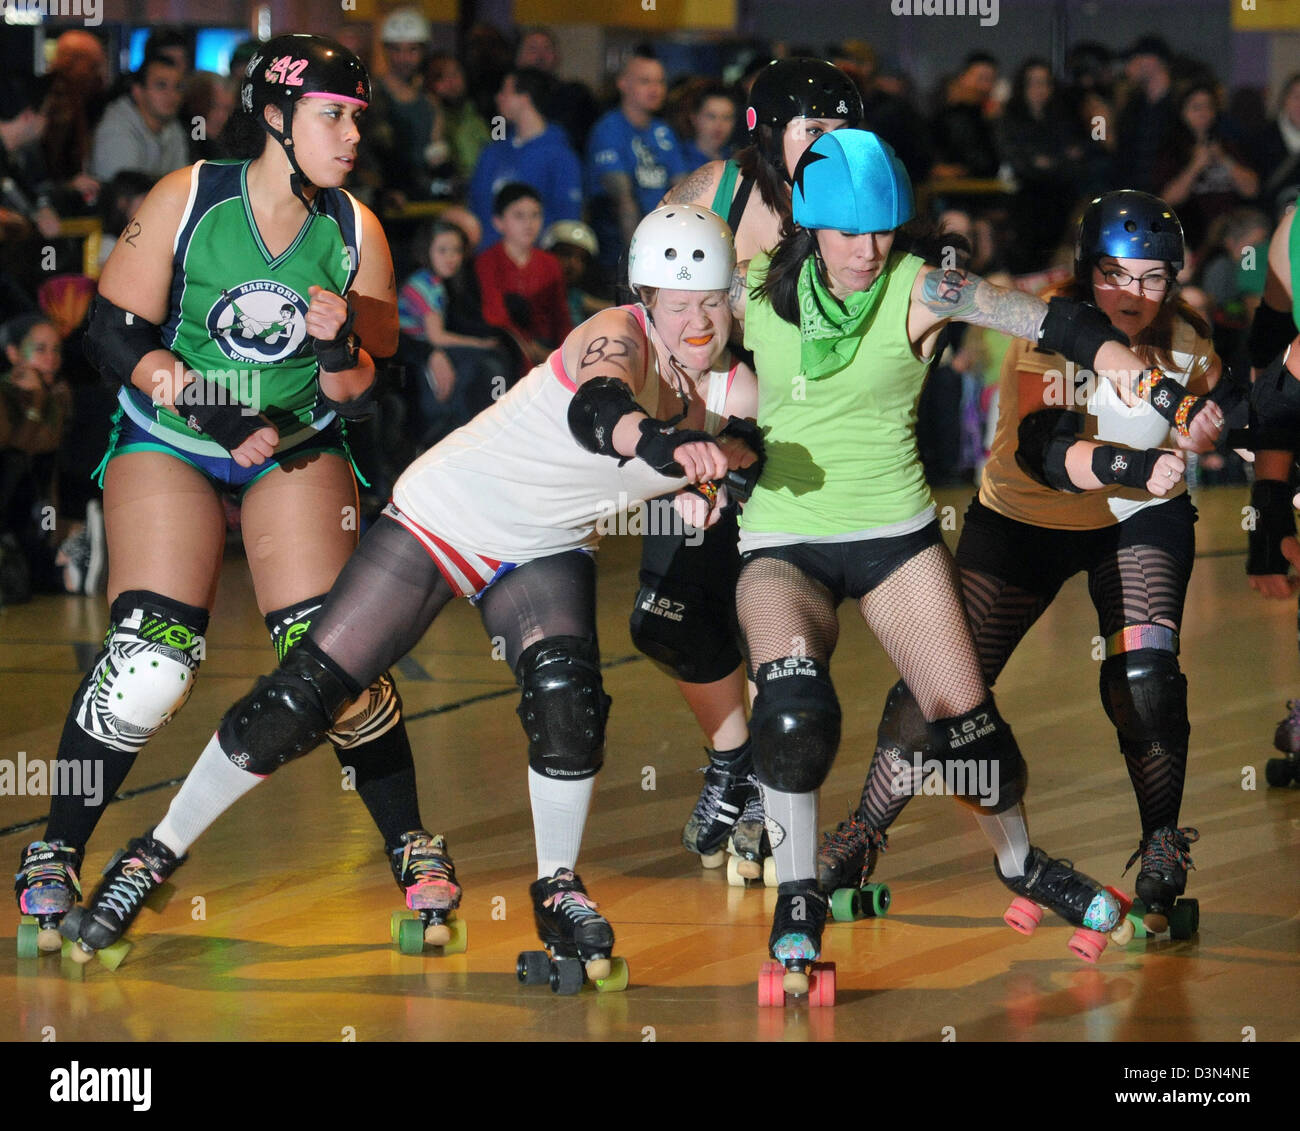 Amateur Roller Derby in Groton CT USA Stockfoto